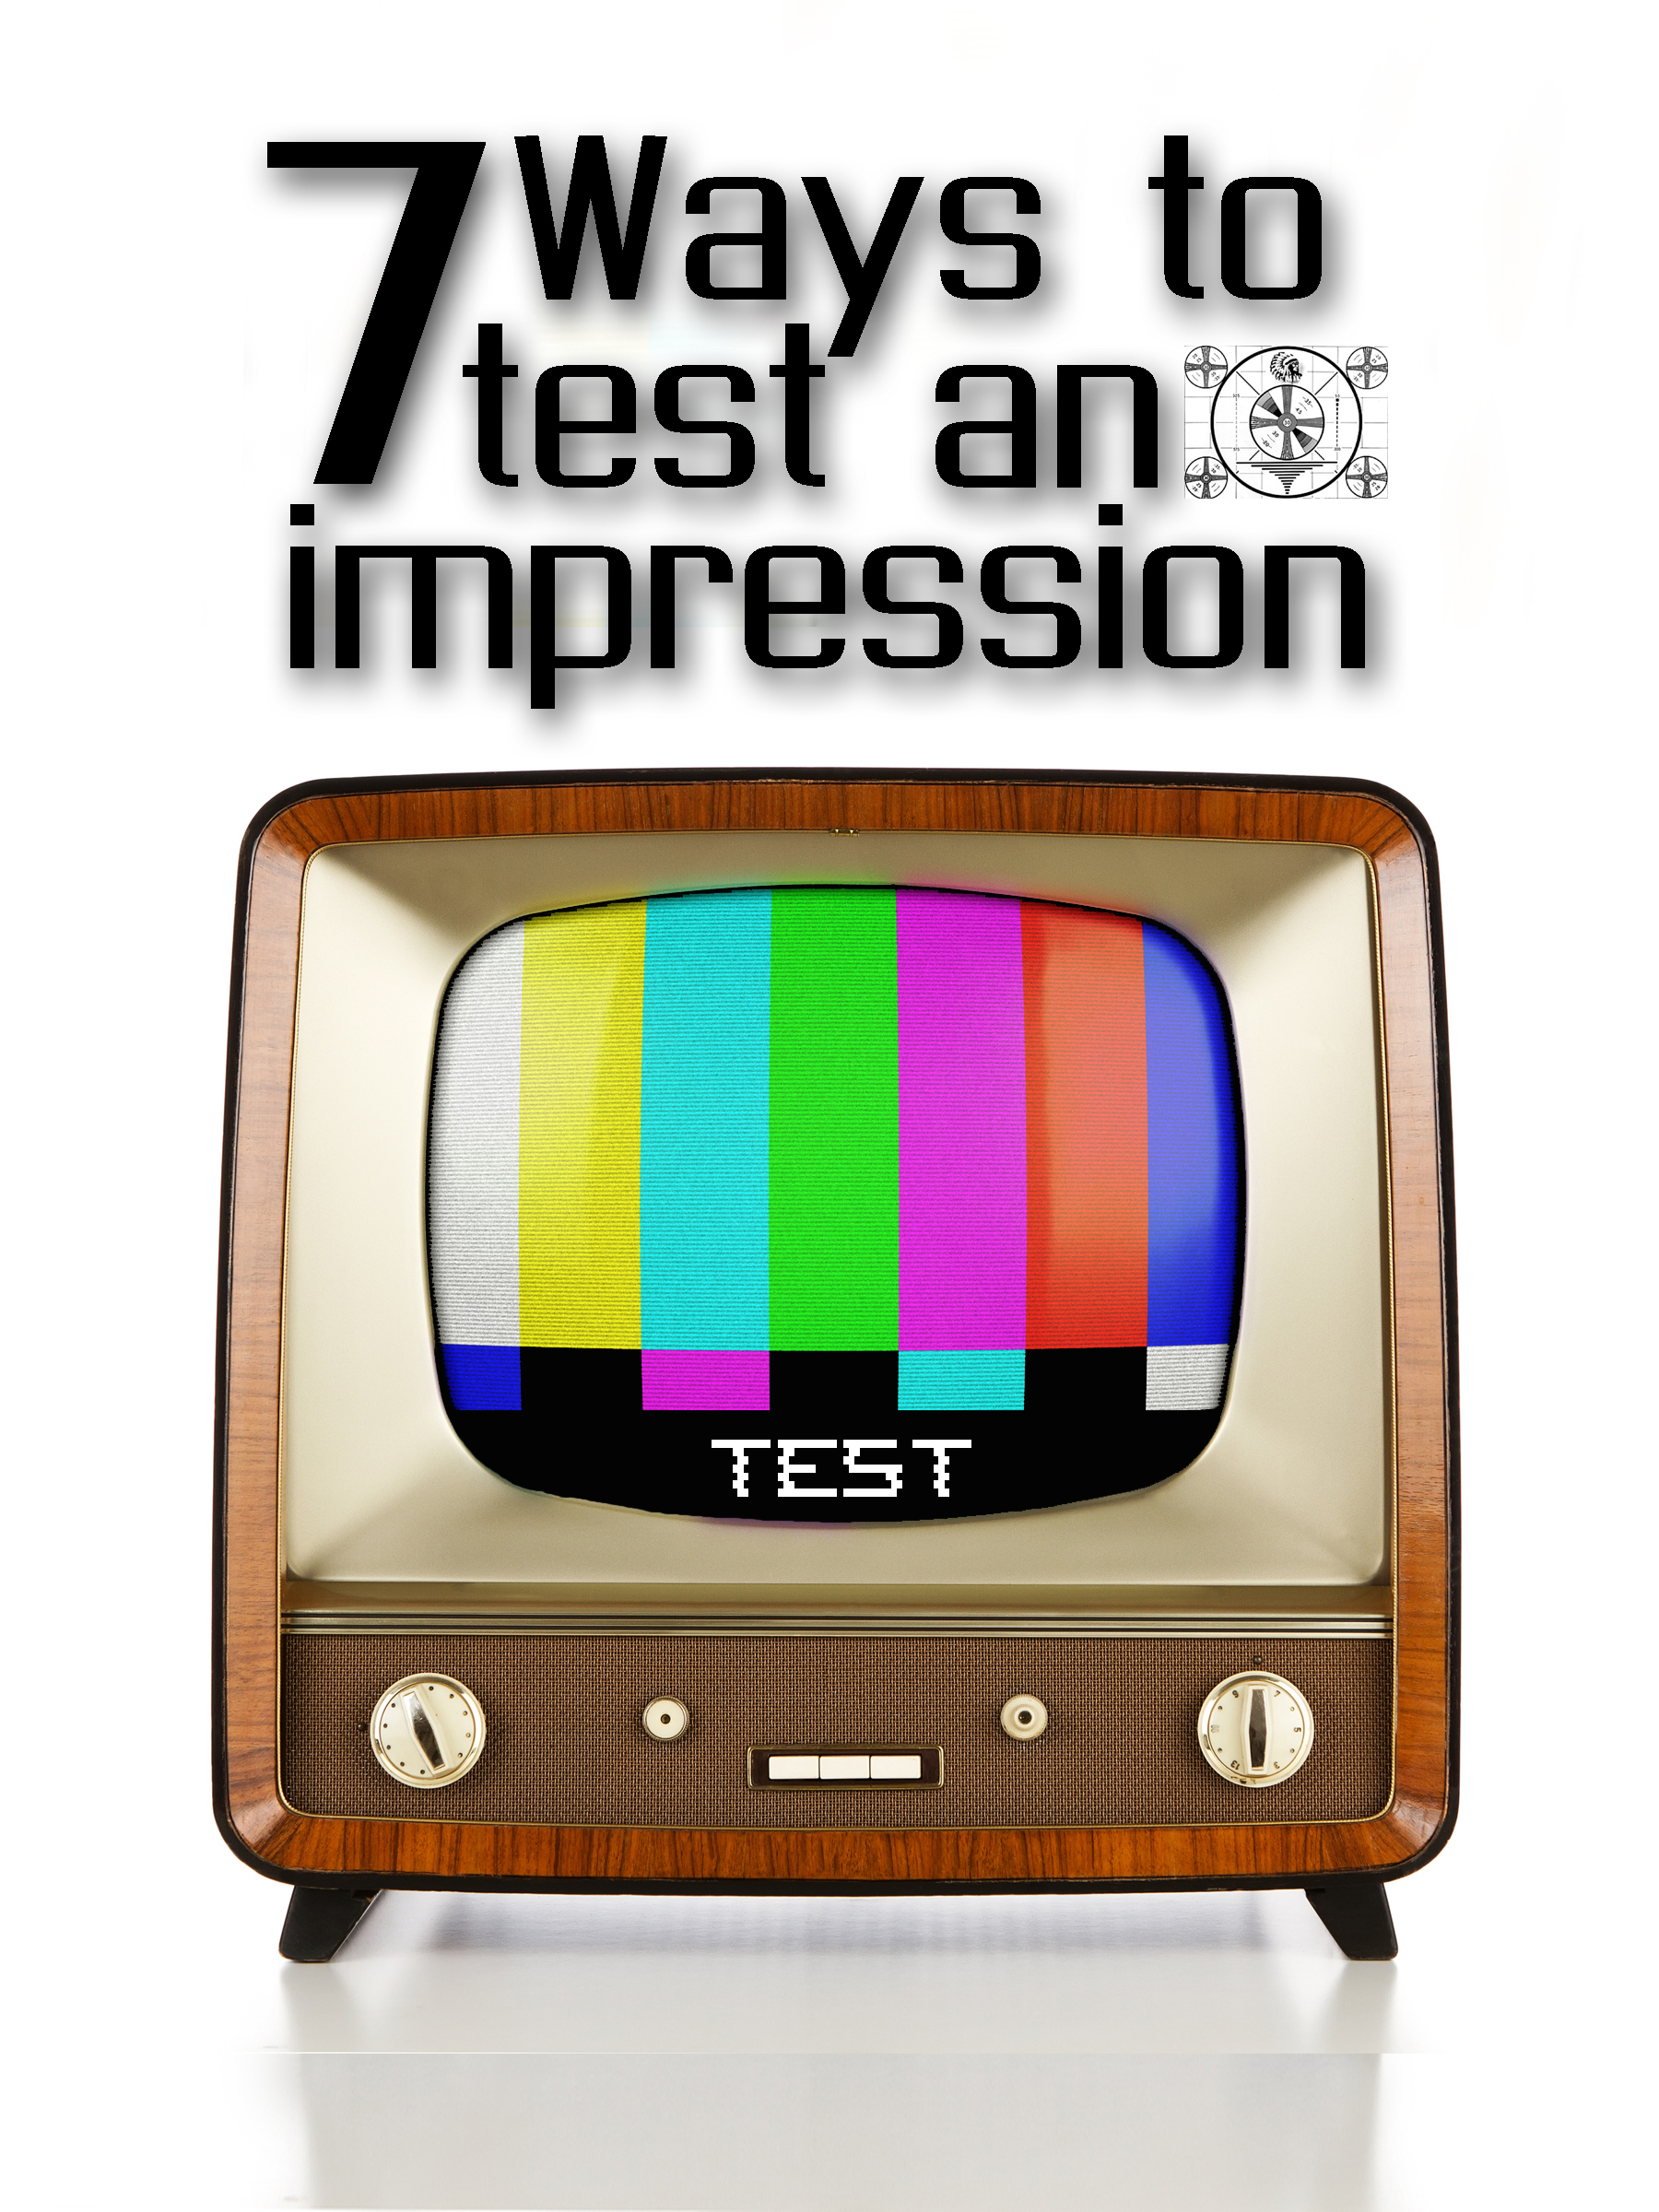 11-24-13  7 Ways To Test An Impression - Part 1 - Recognizing God's Voice 